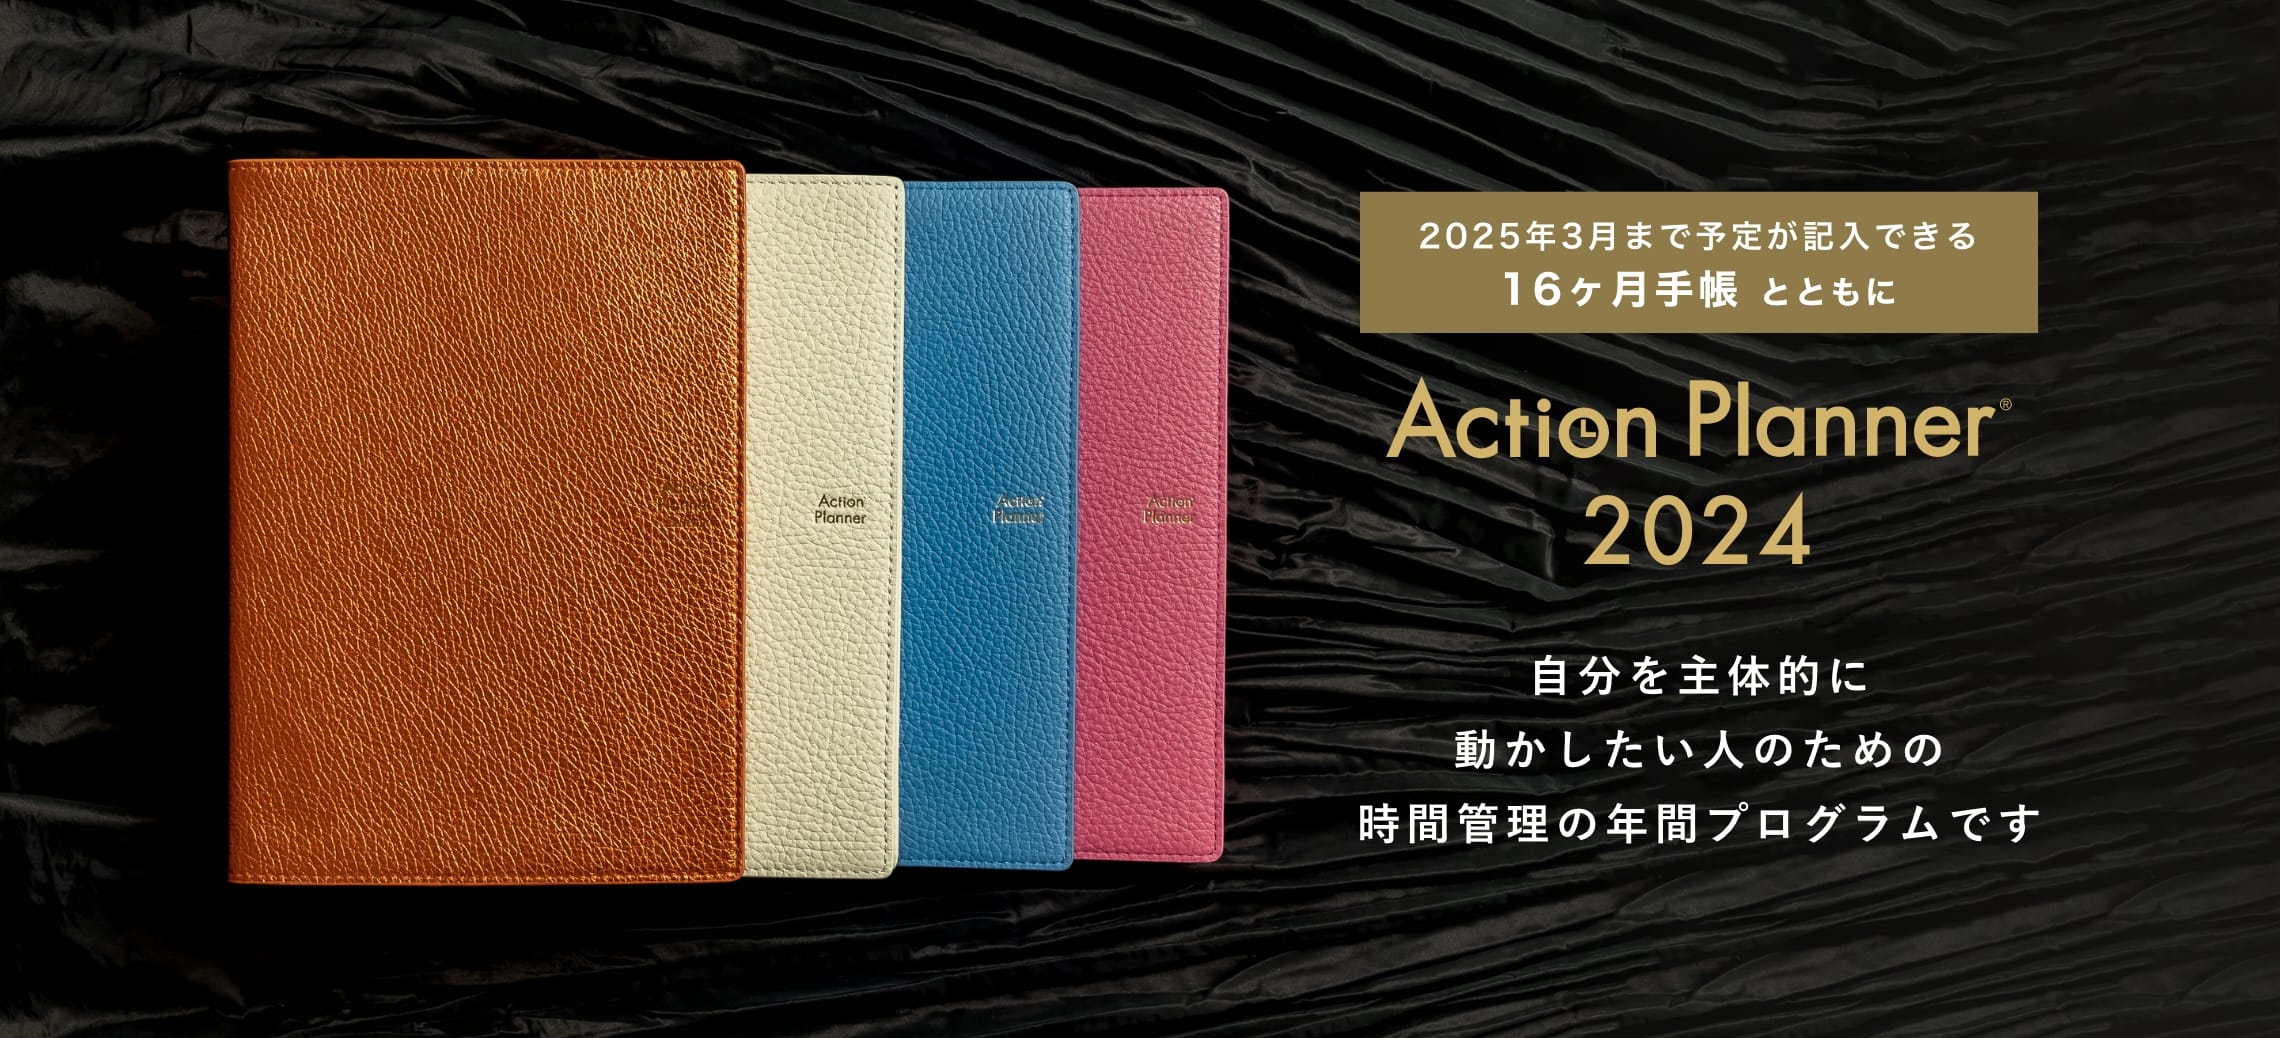 Action Planner 2024